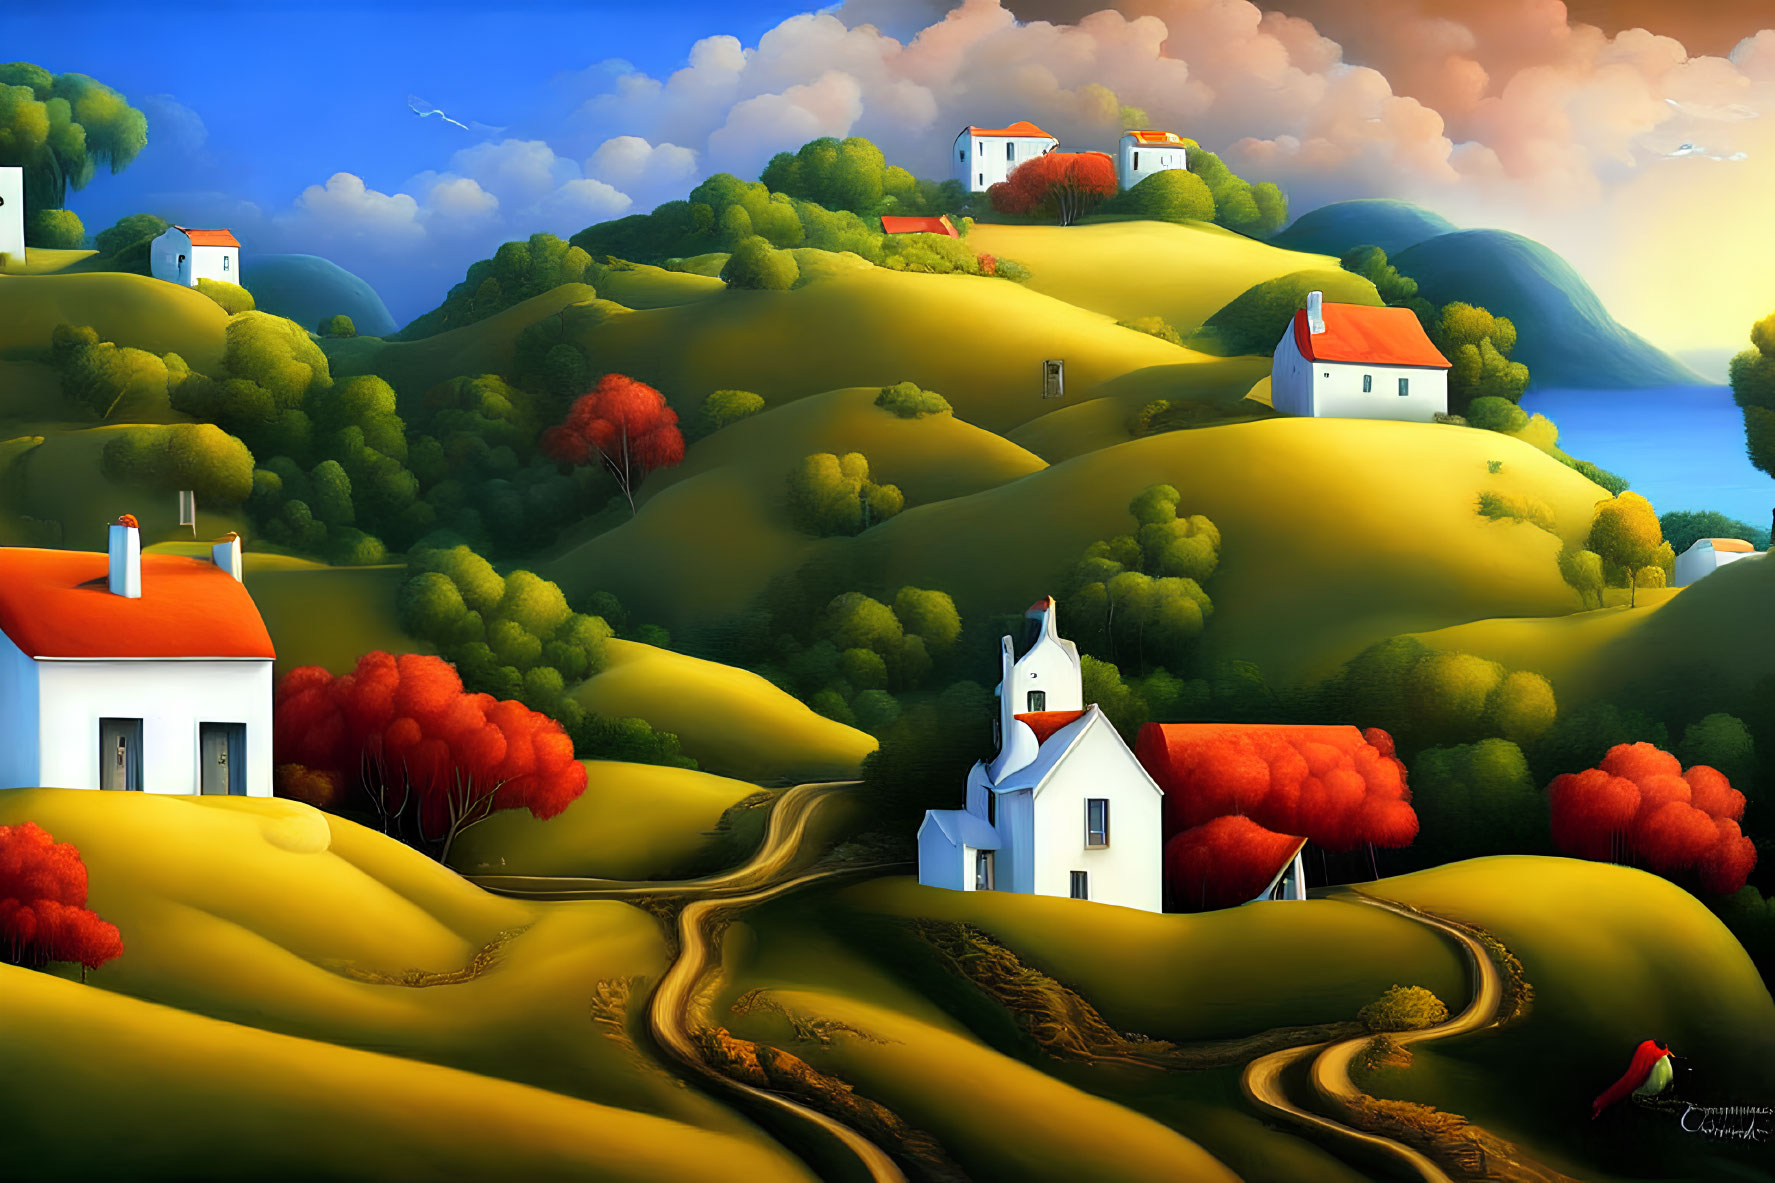 Colorful landscape painting with rolling hills, white houses, red trees, and winding paths under a blue